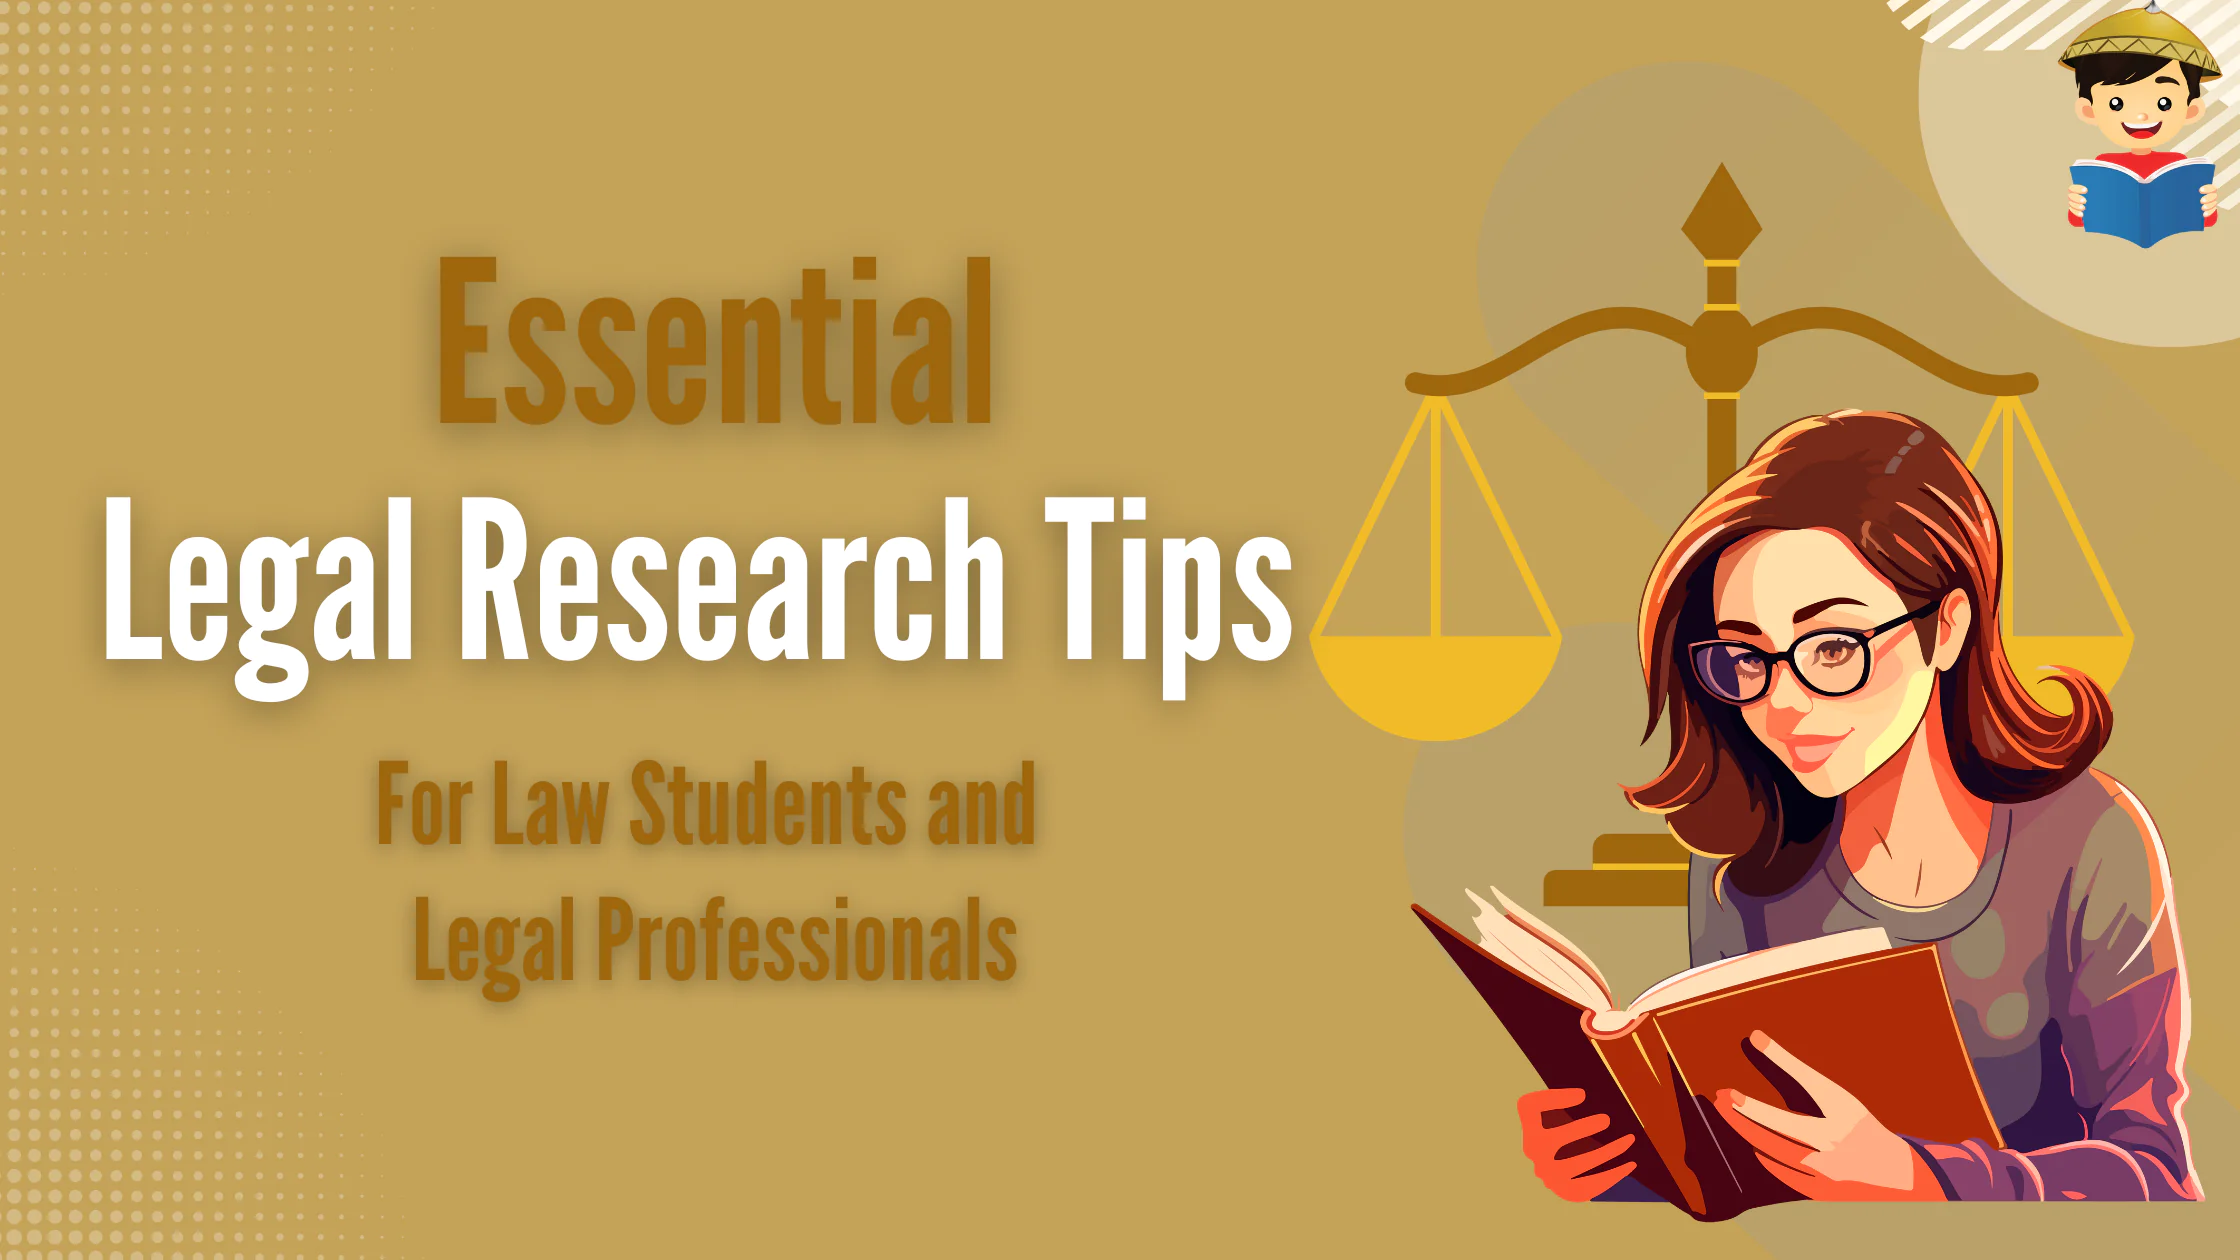 Essential Legal Research Tips for Law Students and Legal Professionals